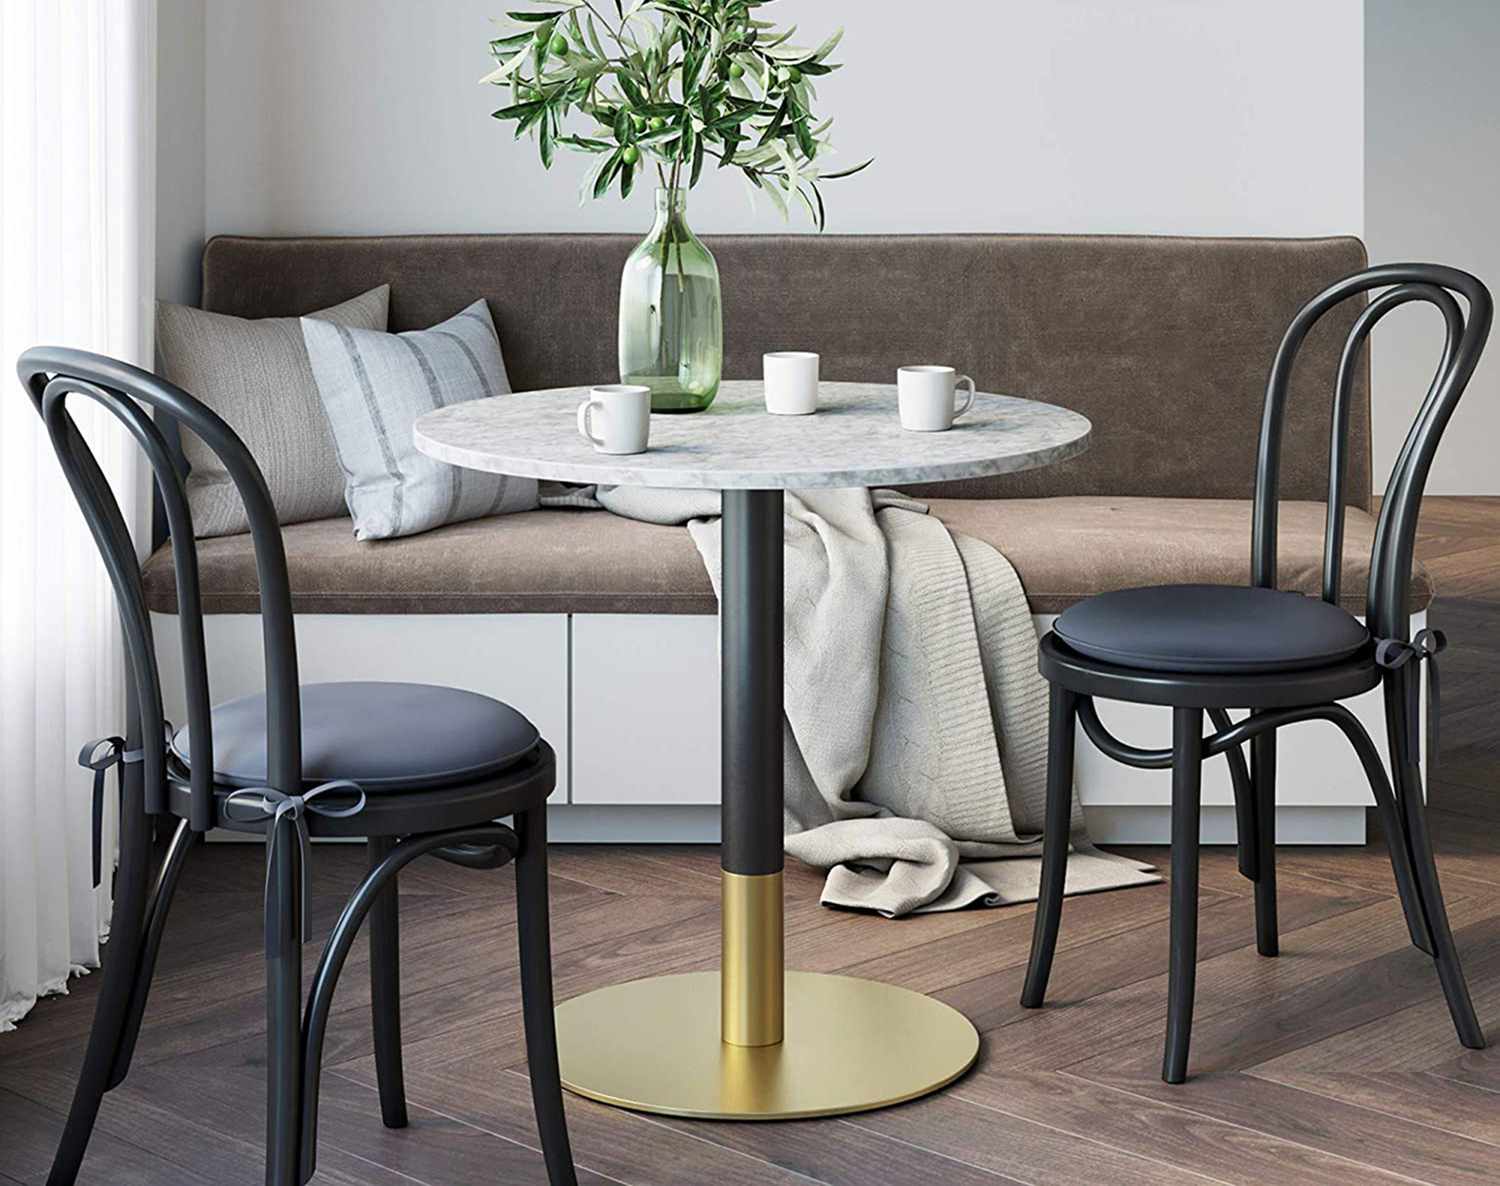 8 Best Dining Tables For Small Spaces, Tall Round Dining Room Tables